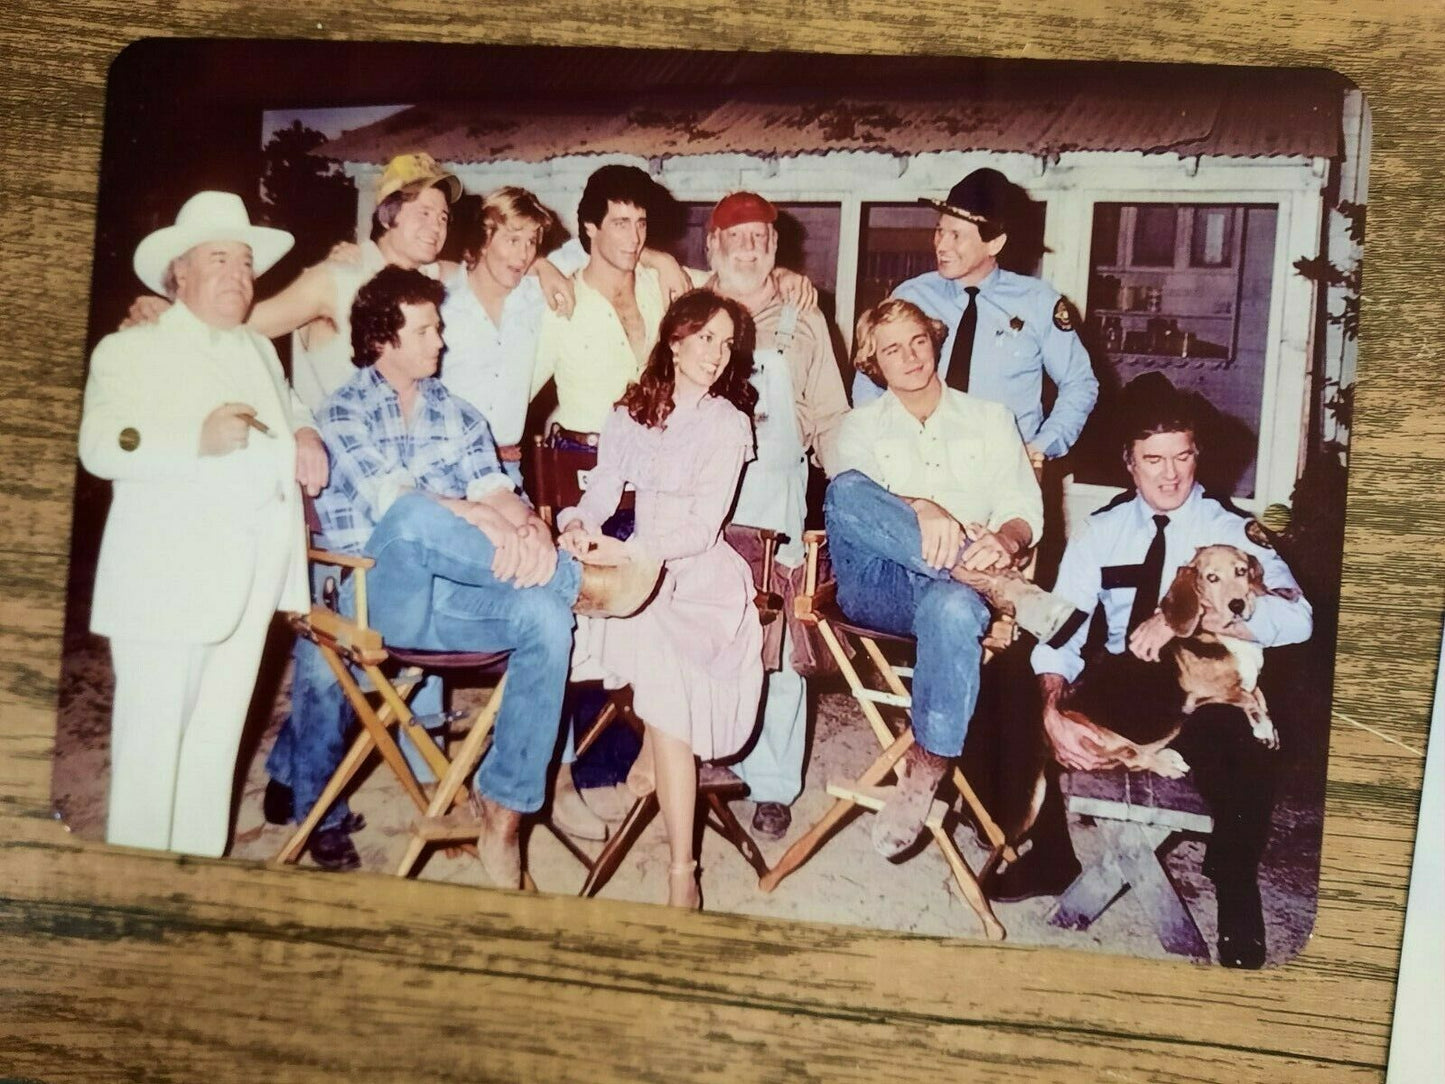 Dukes of Hazzard Cast Photo 8x12 Metal Wall Sign Western TV Show Movie